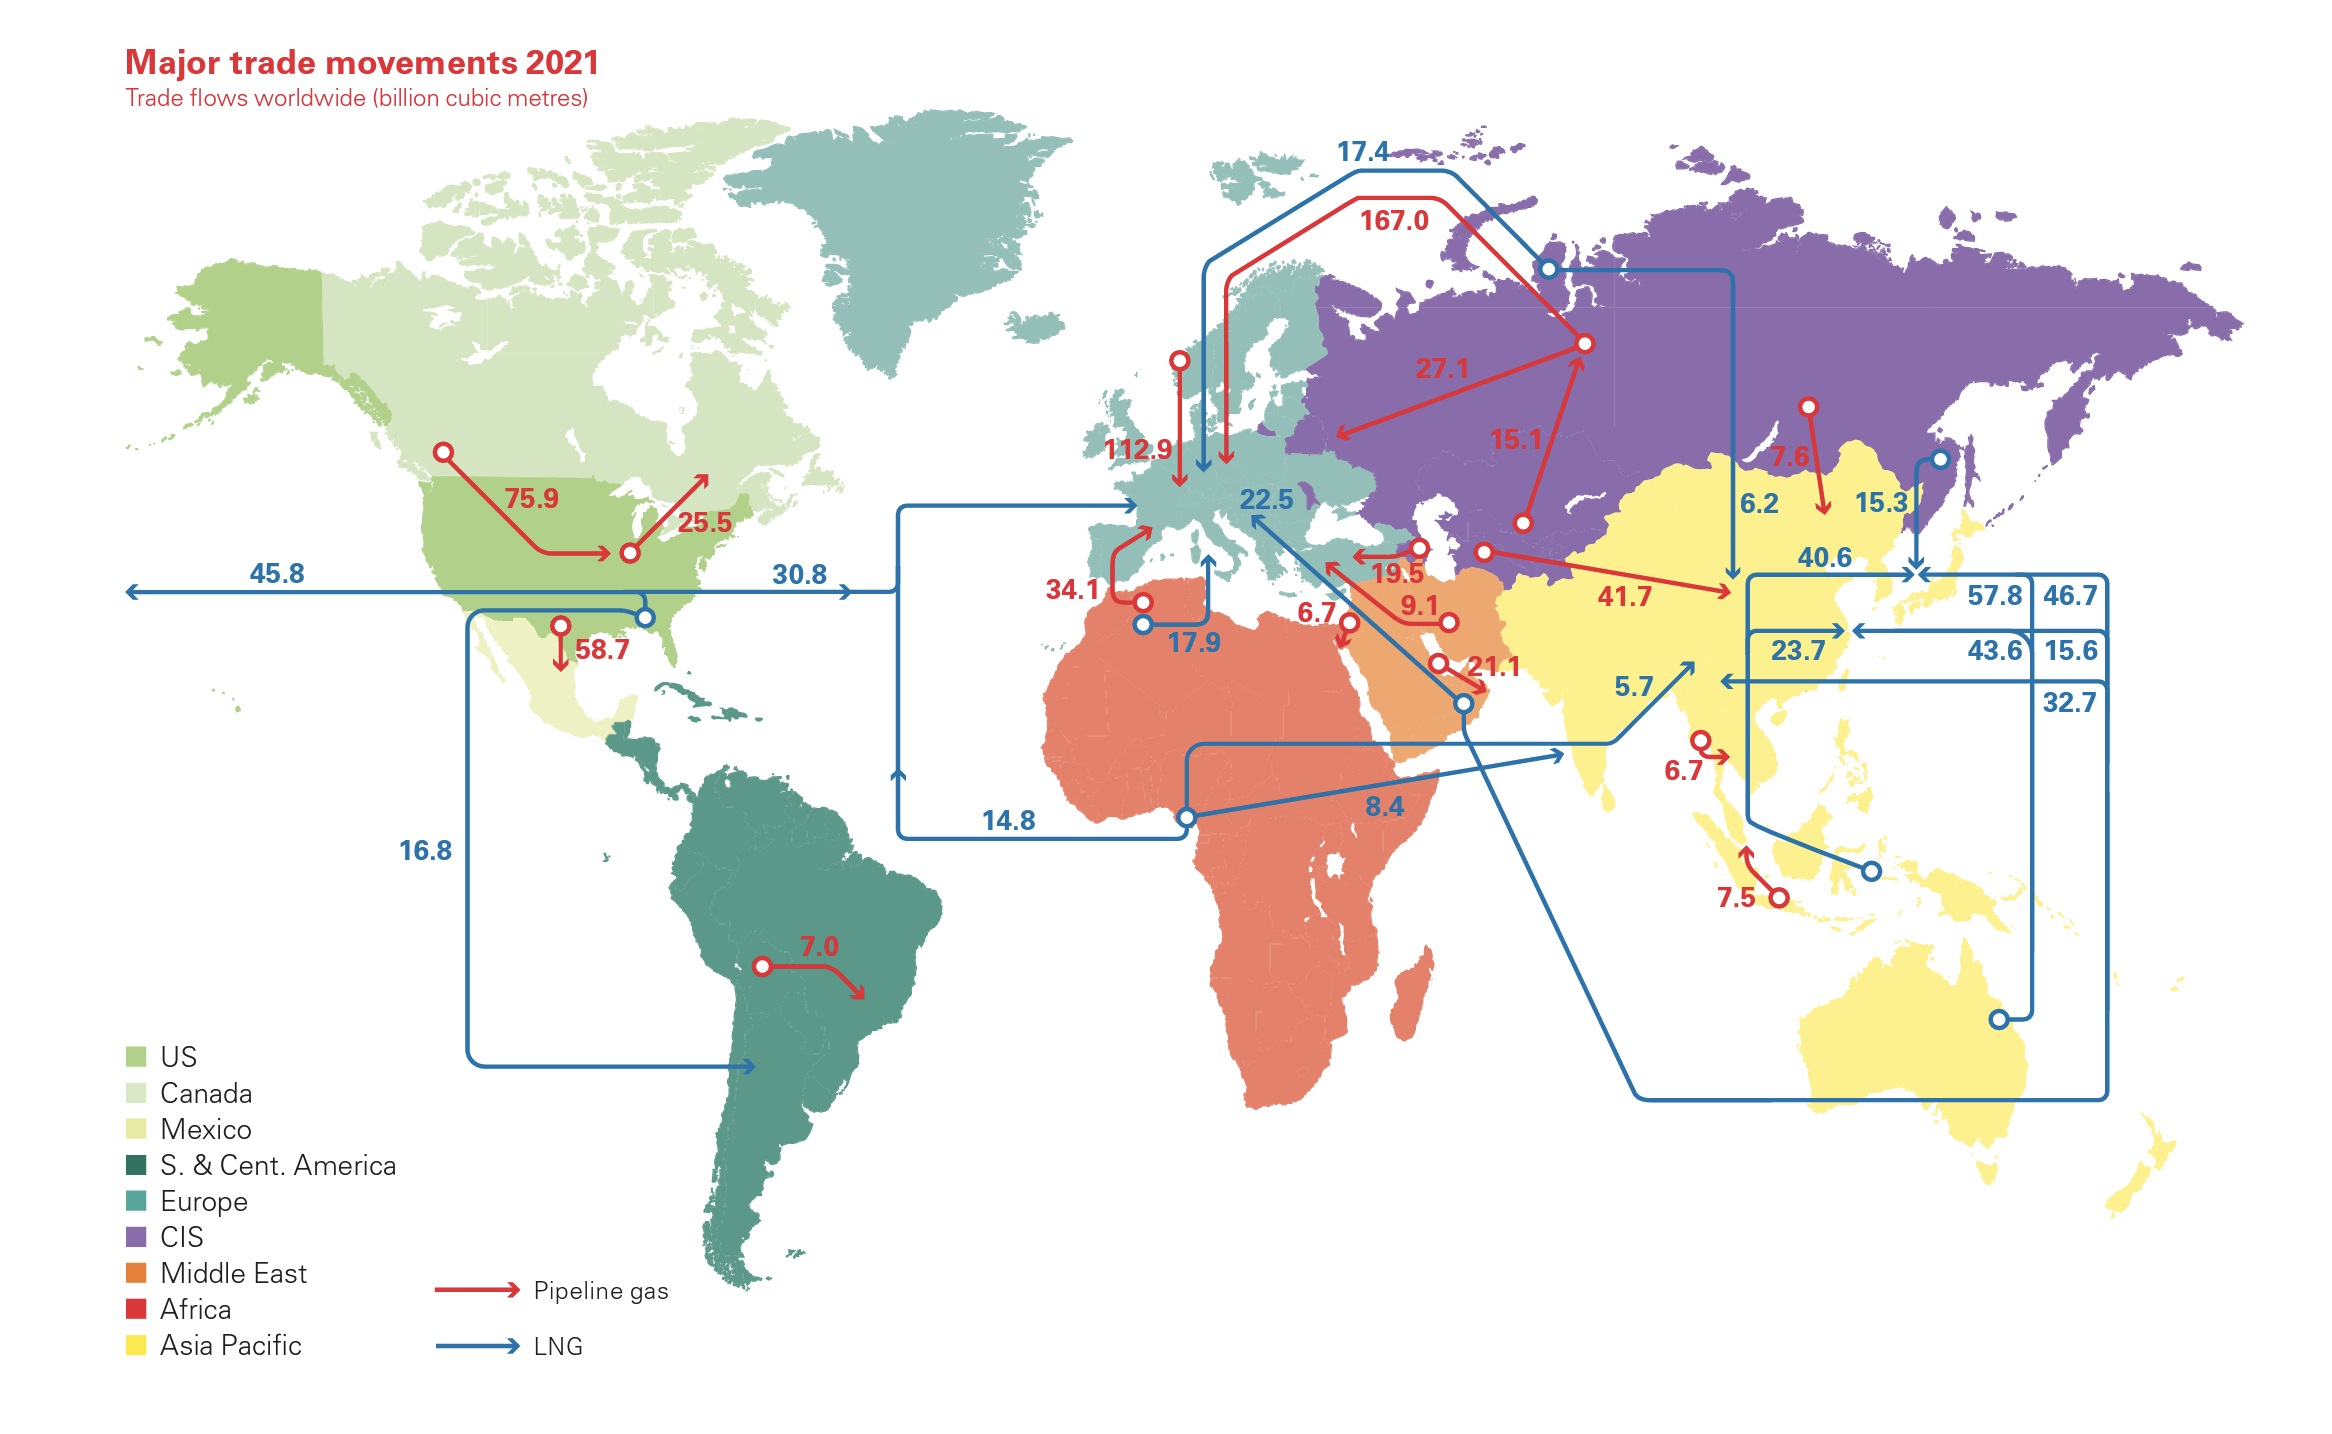 Map showing major trade movements, 2020. Most LNG goes to Asia while pipeline gas goes to Europe